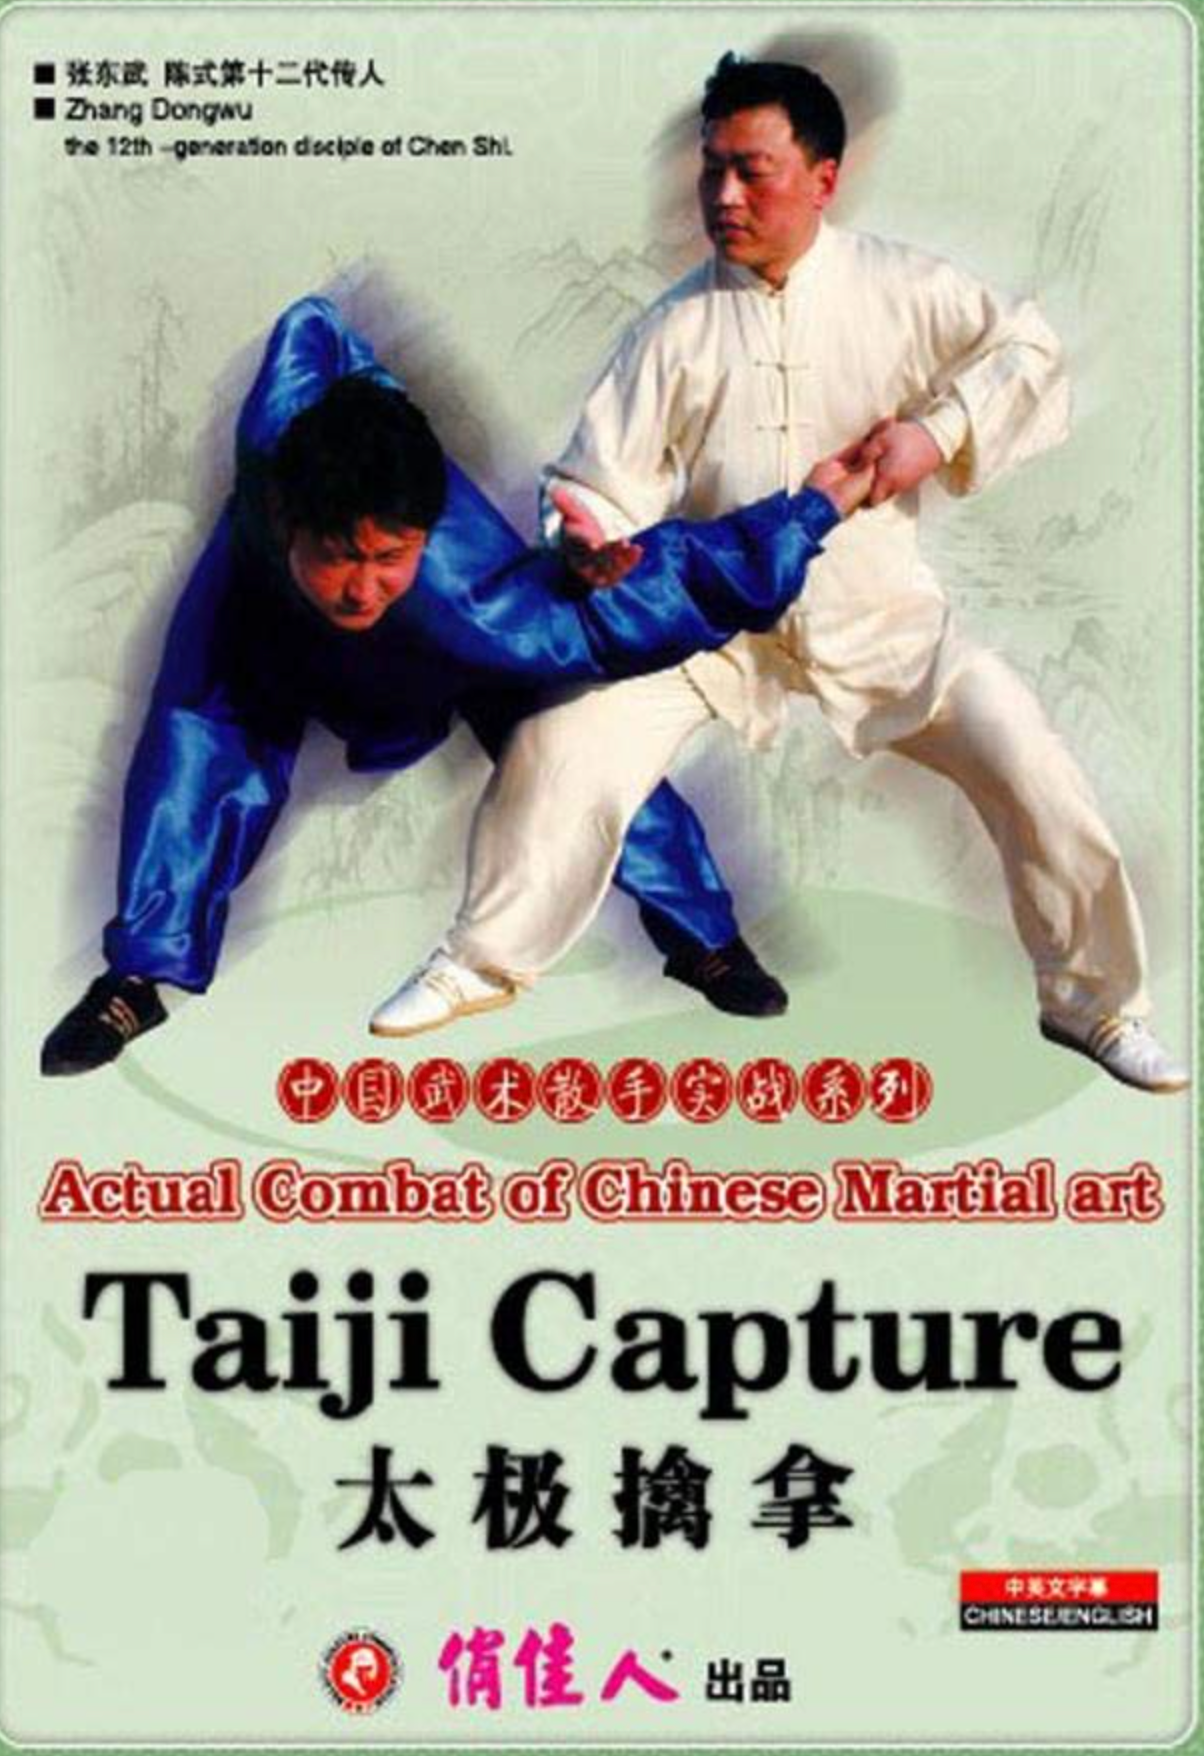 Actual Combat of Chinese Martial Art Taiji Capture DVD by Zhang Dongwu (Preowned)